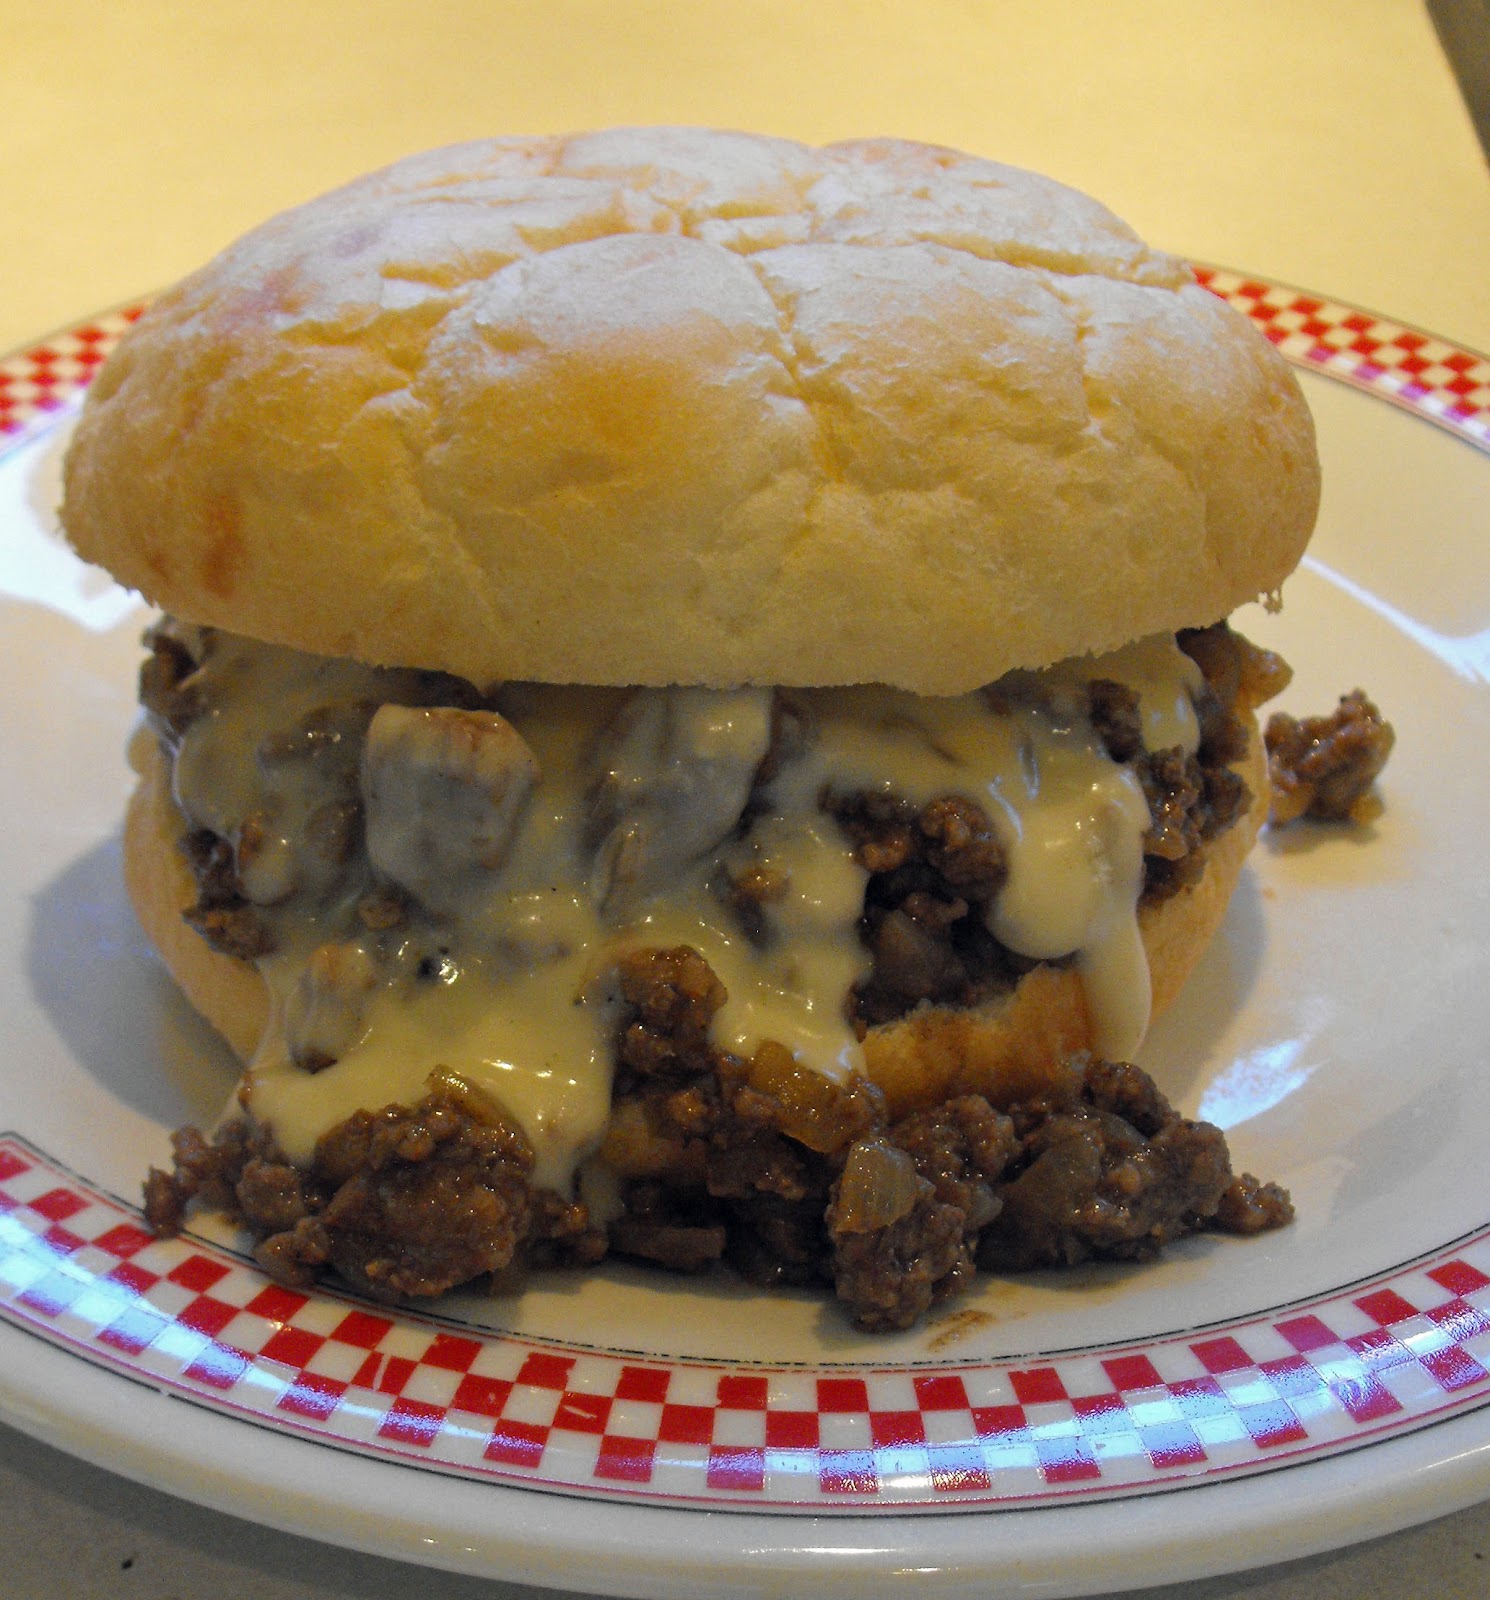 Jo and Sue: Philly Cheesesteak Sloppy Joes